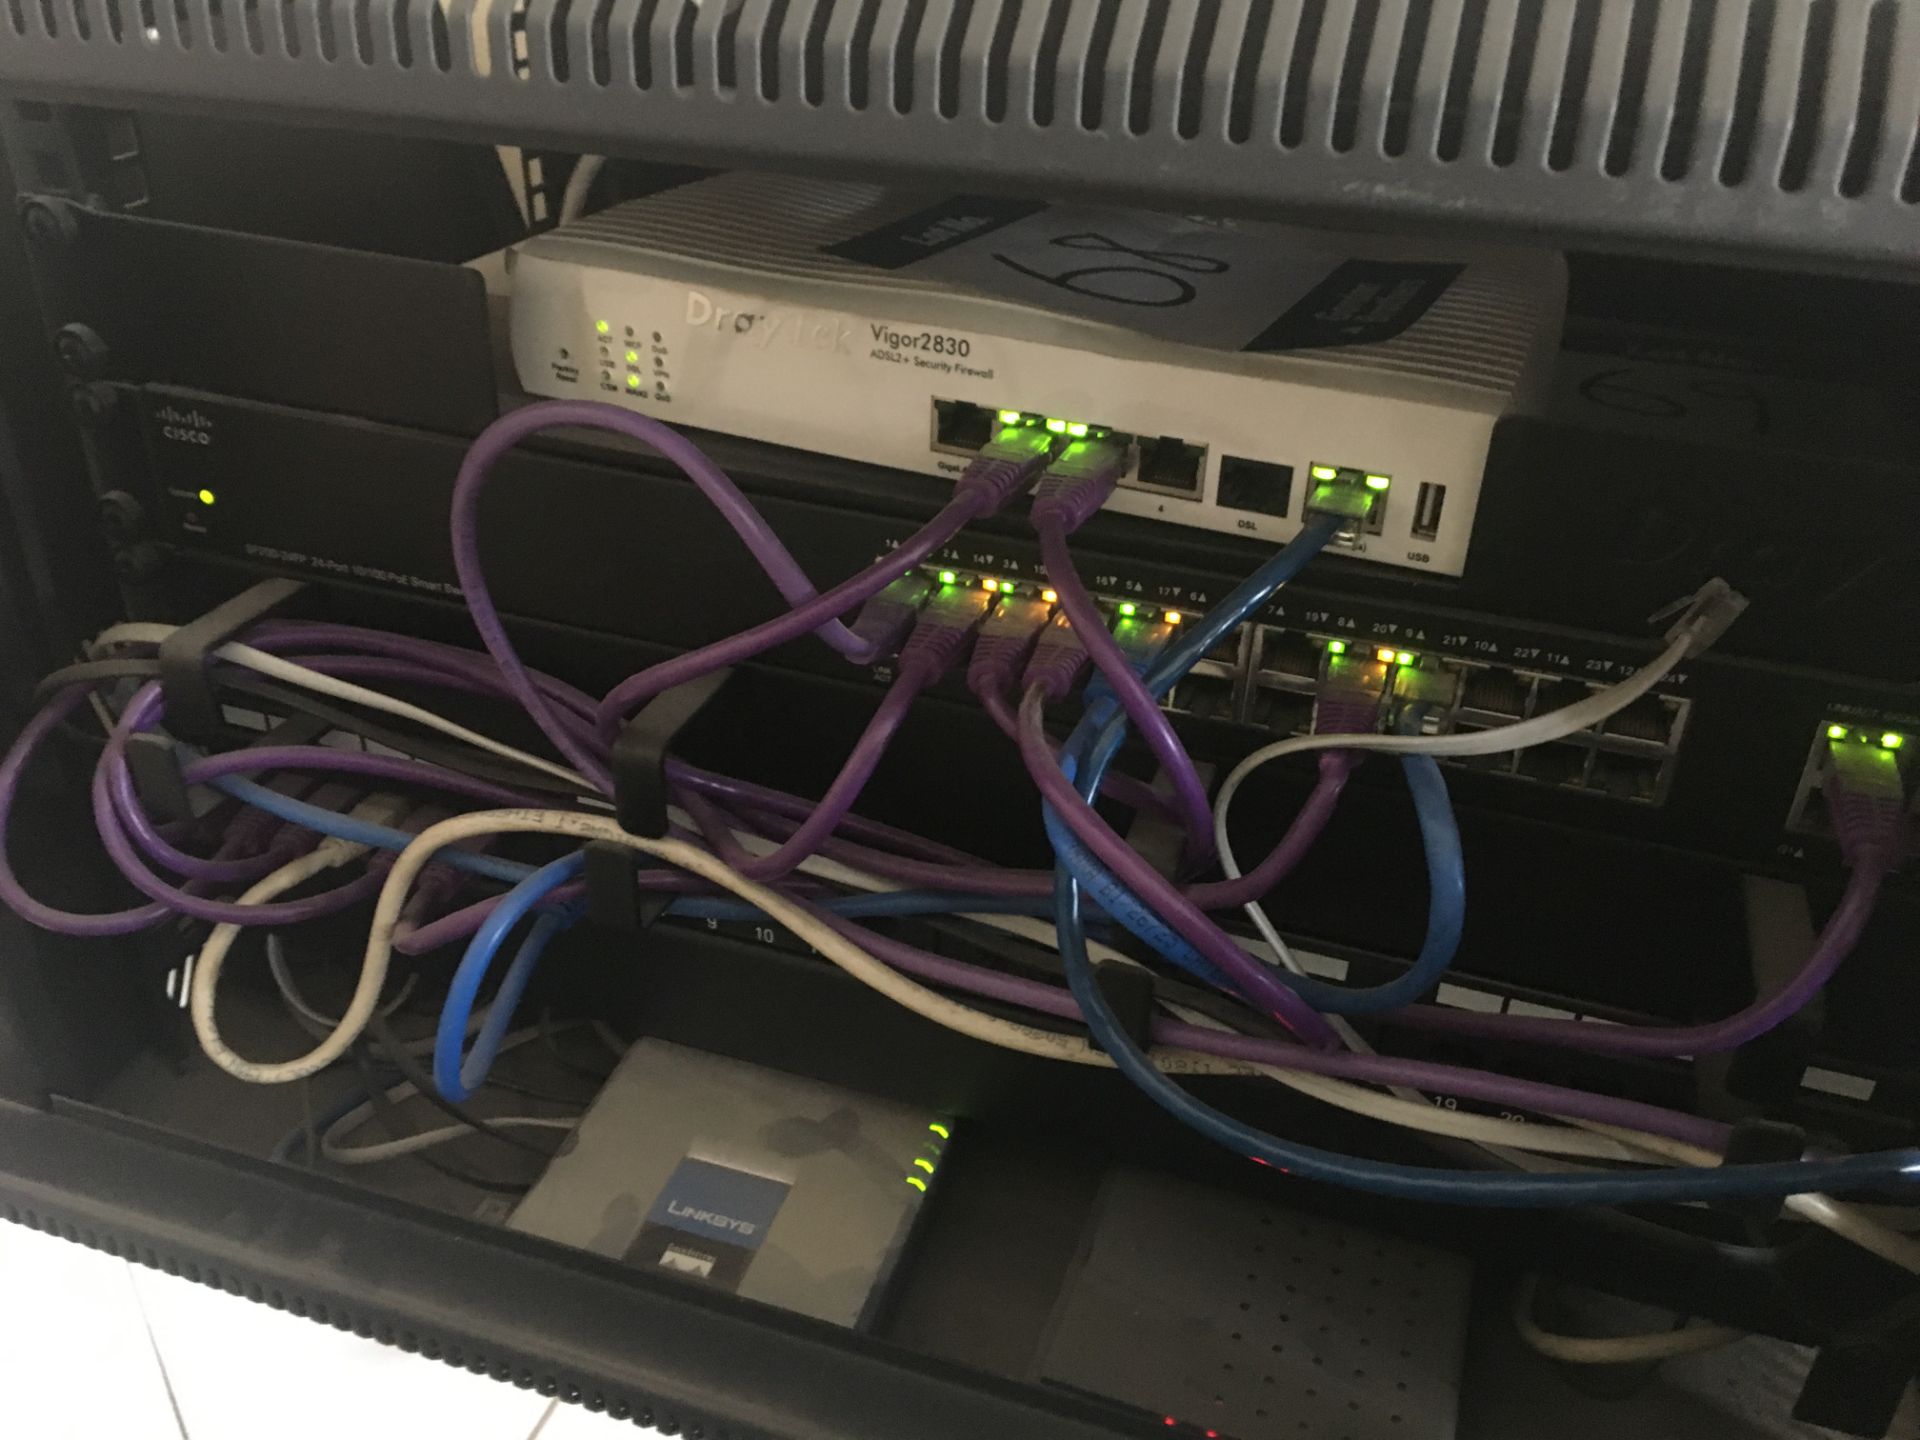 Cisco SF200-24FP rack mounted 24 Port 10 / 100 POE smart switch with Cat 5e rack mounted 24 port - Image 2 of 4